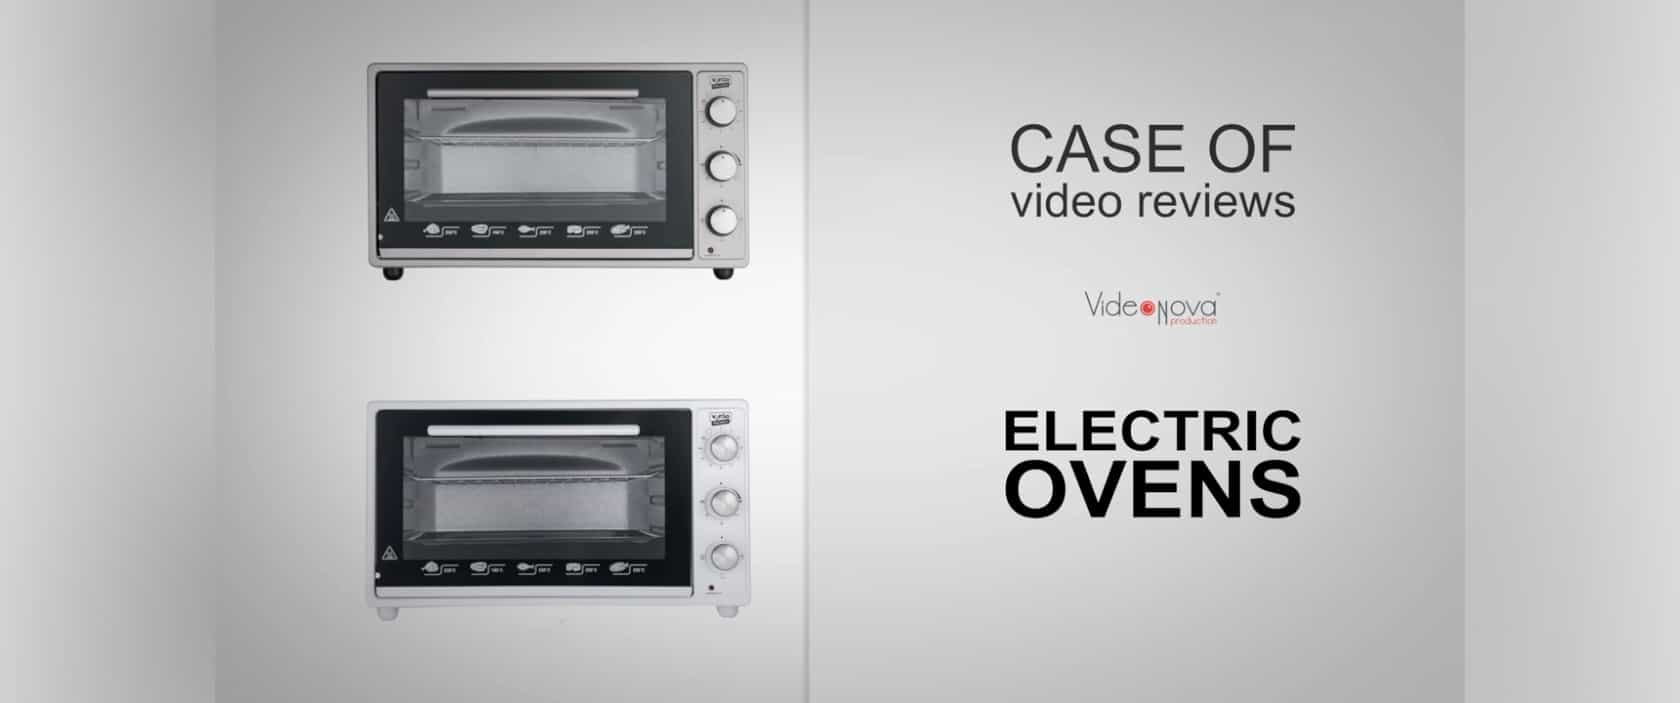 Case video review of large household appliances" Electric furnaces. Case"